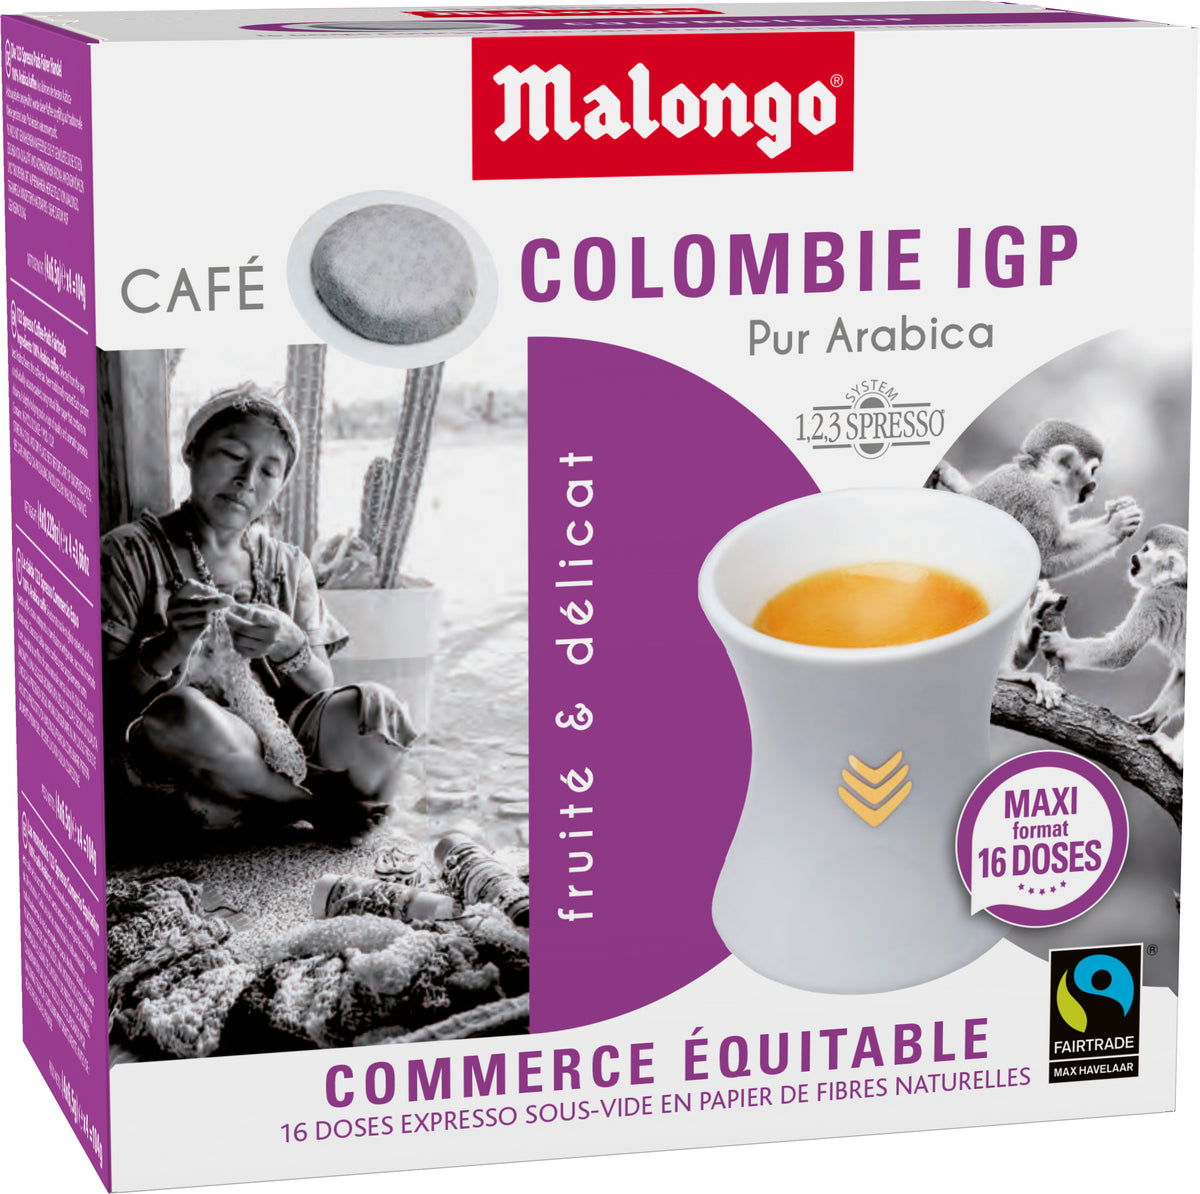 Malongo - Coffee, from plantation to cup